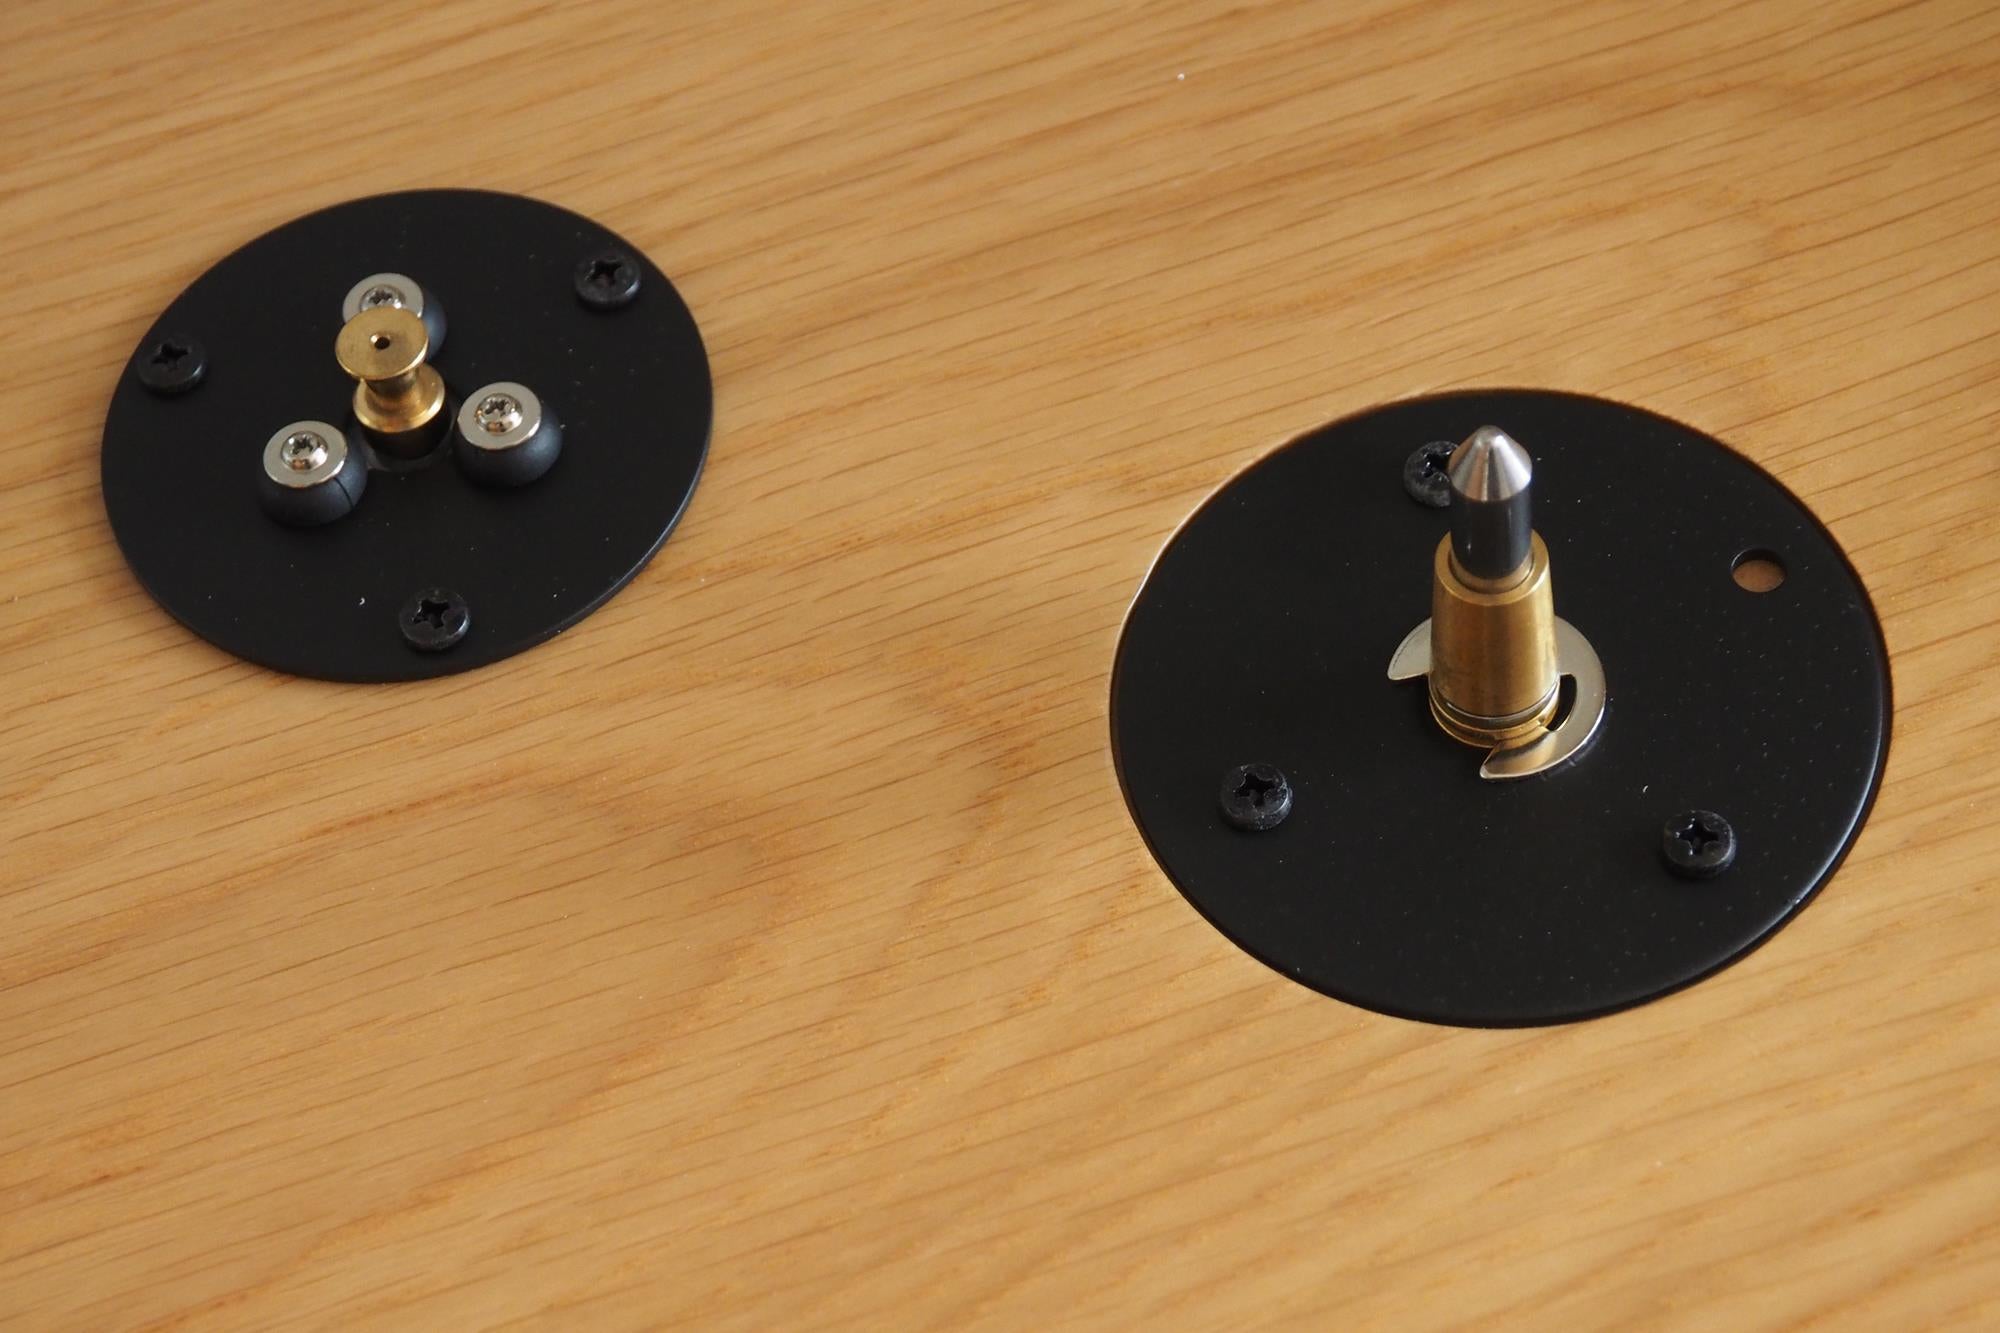 Turntable platter parts on wooden surface.